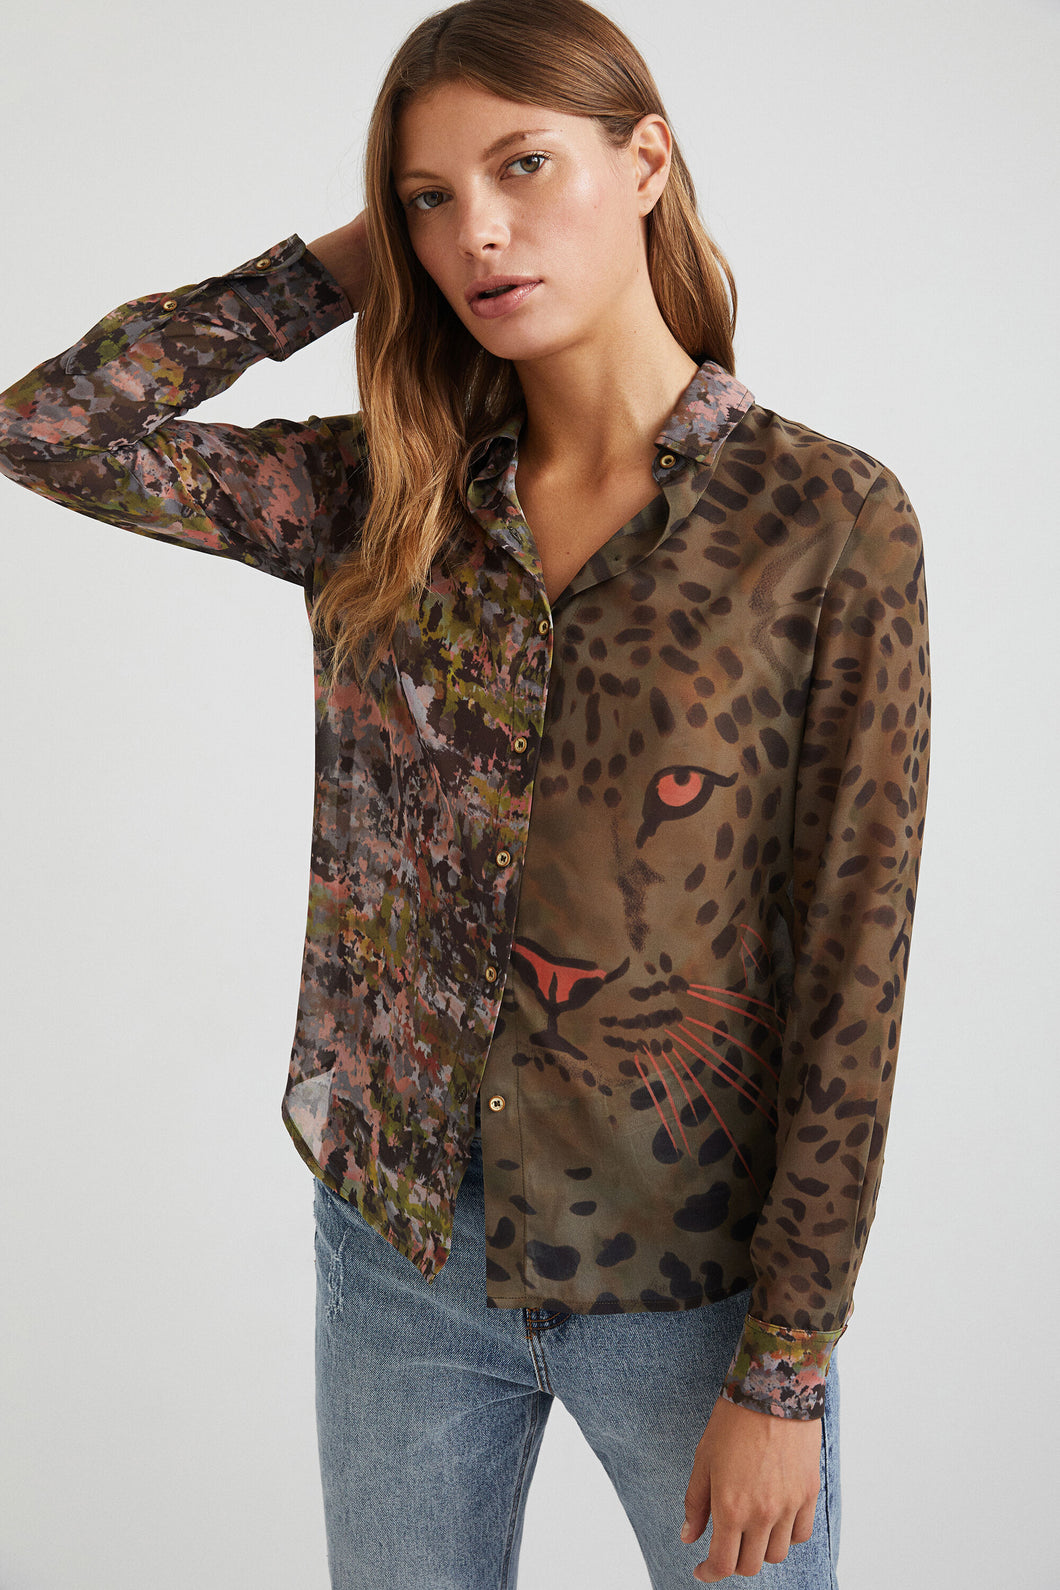 Wild Camo Double Print Shirt by Desiqual - Indie Indie Bang! Bang!